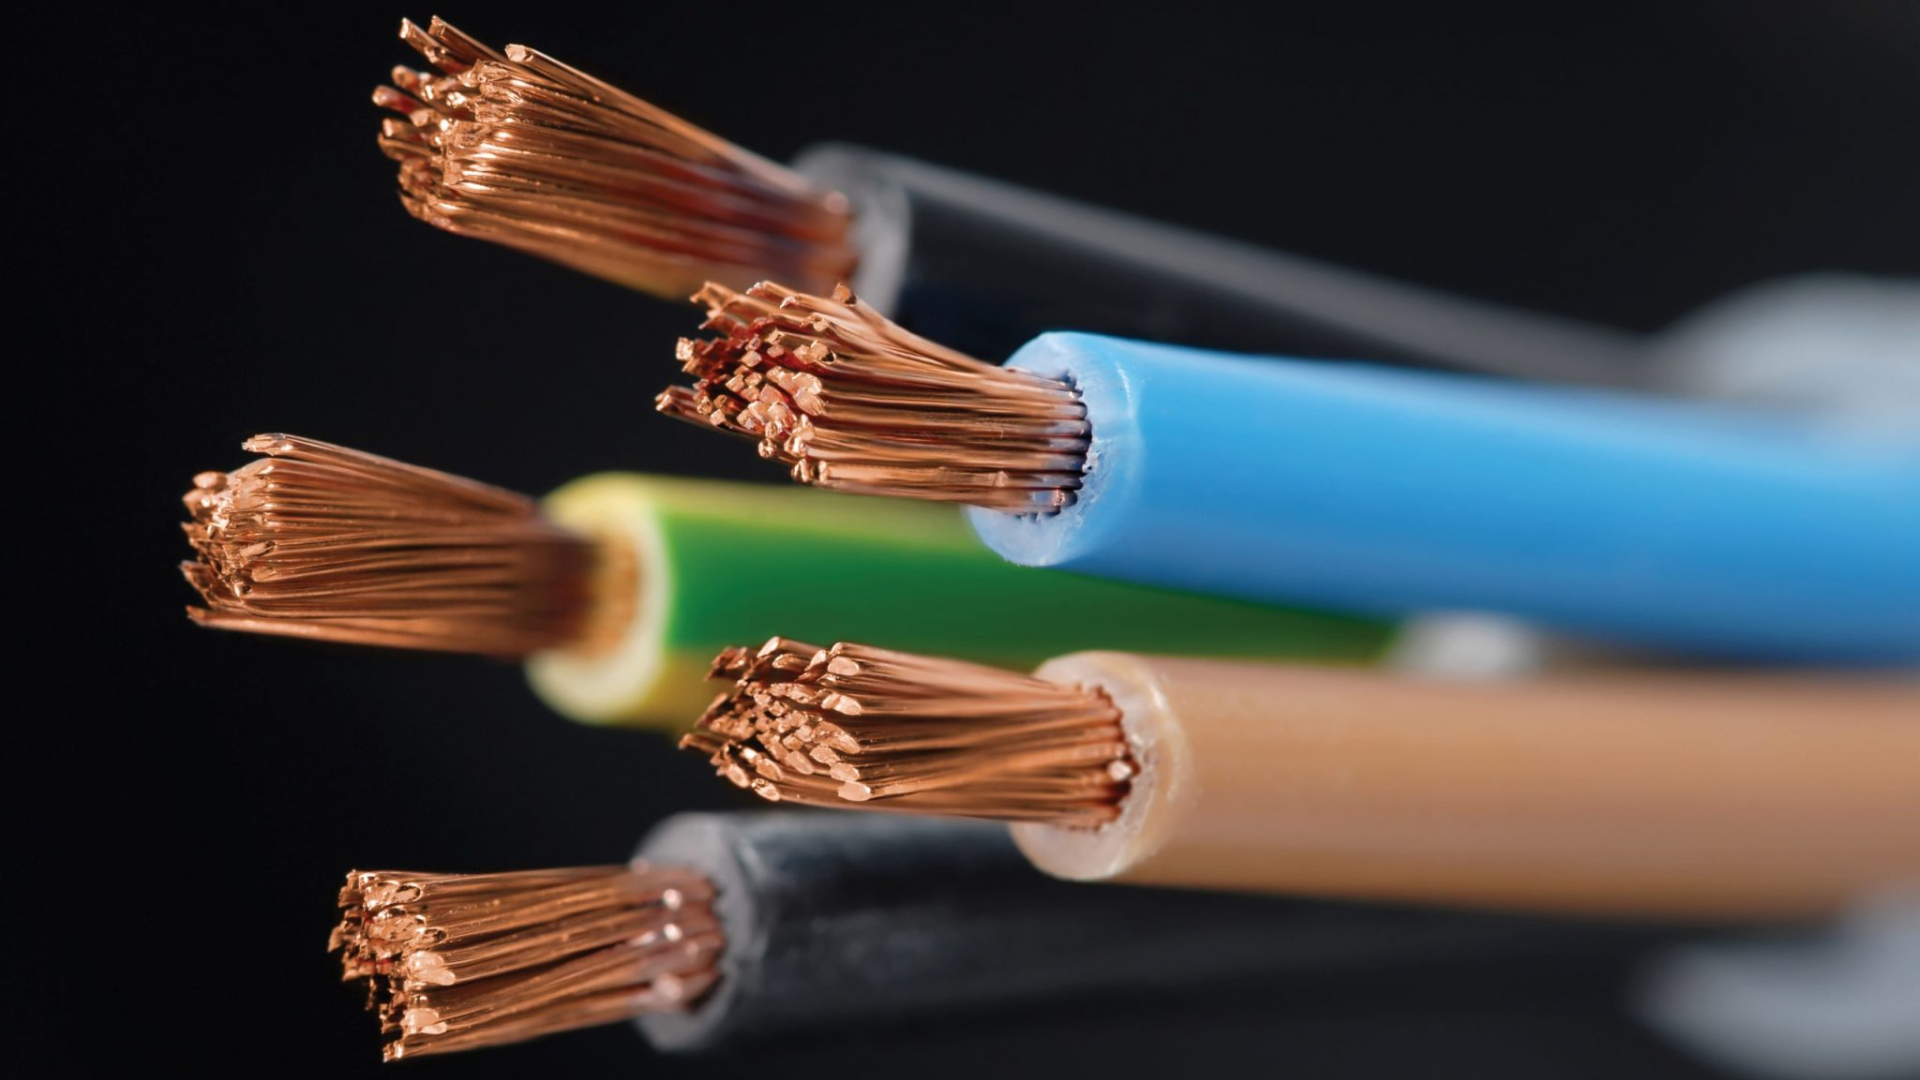 How to Find MICC Cable Suppliers in Dubai?